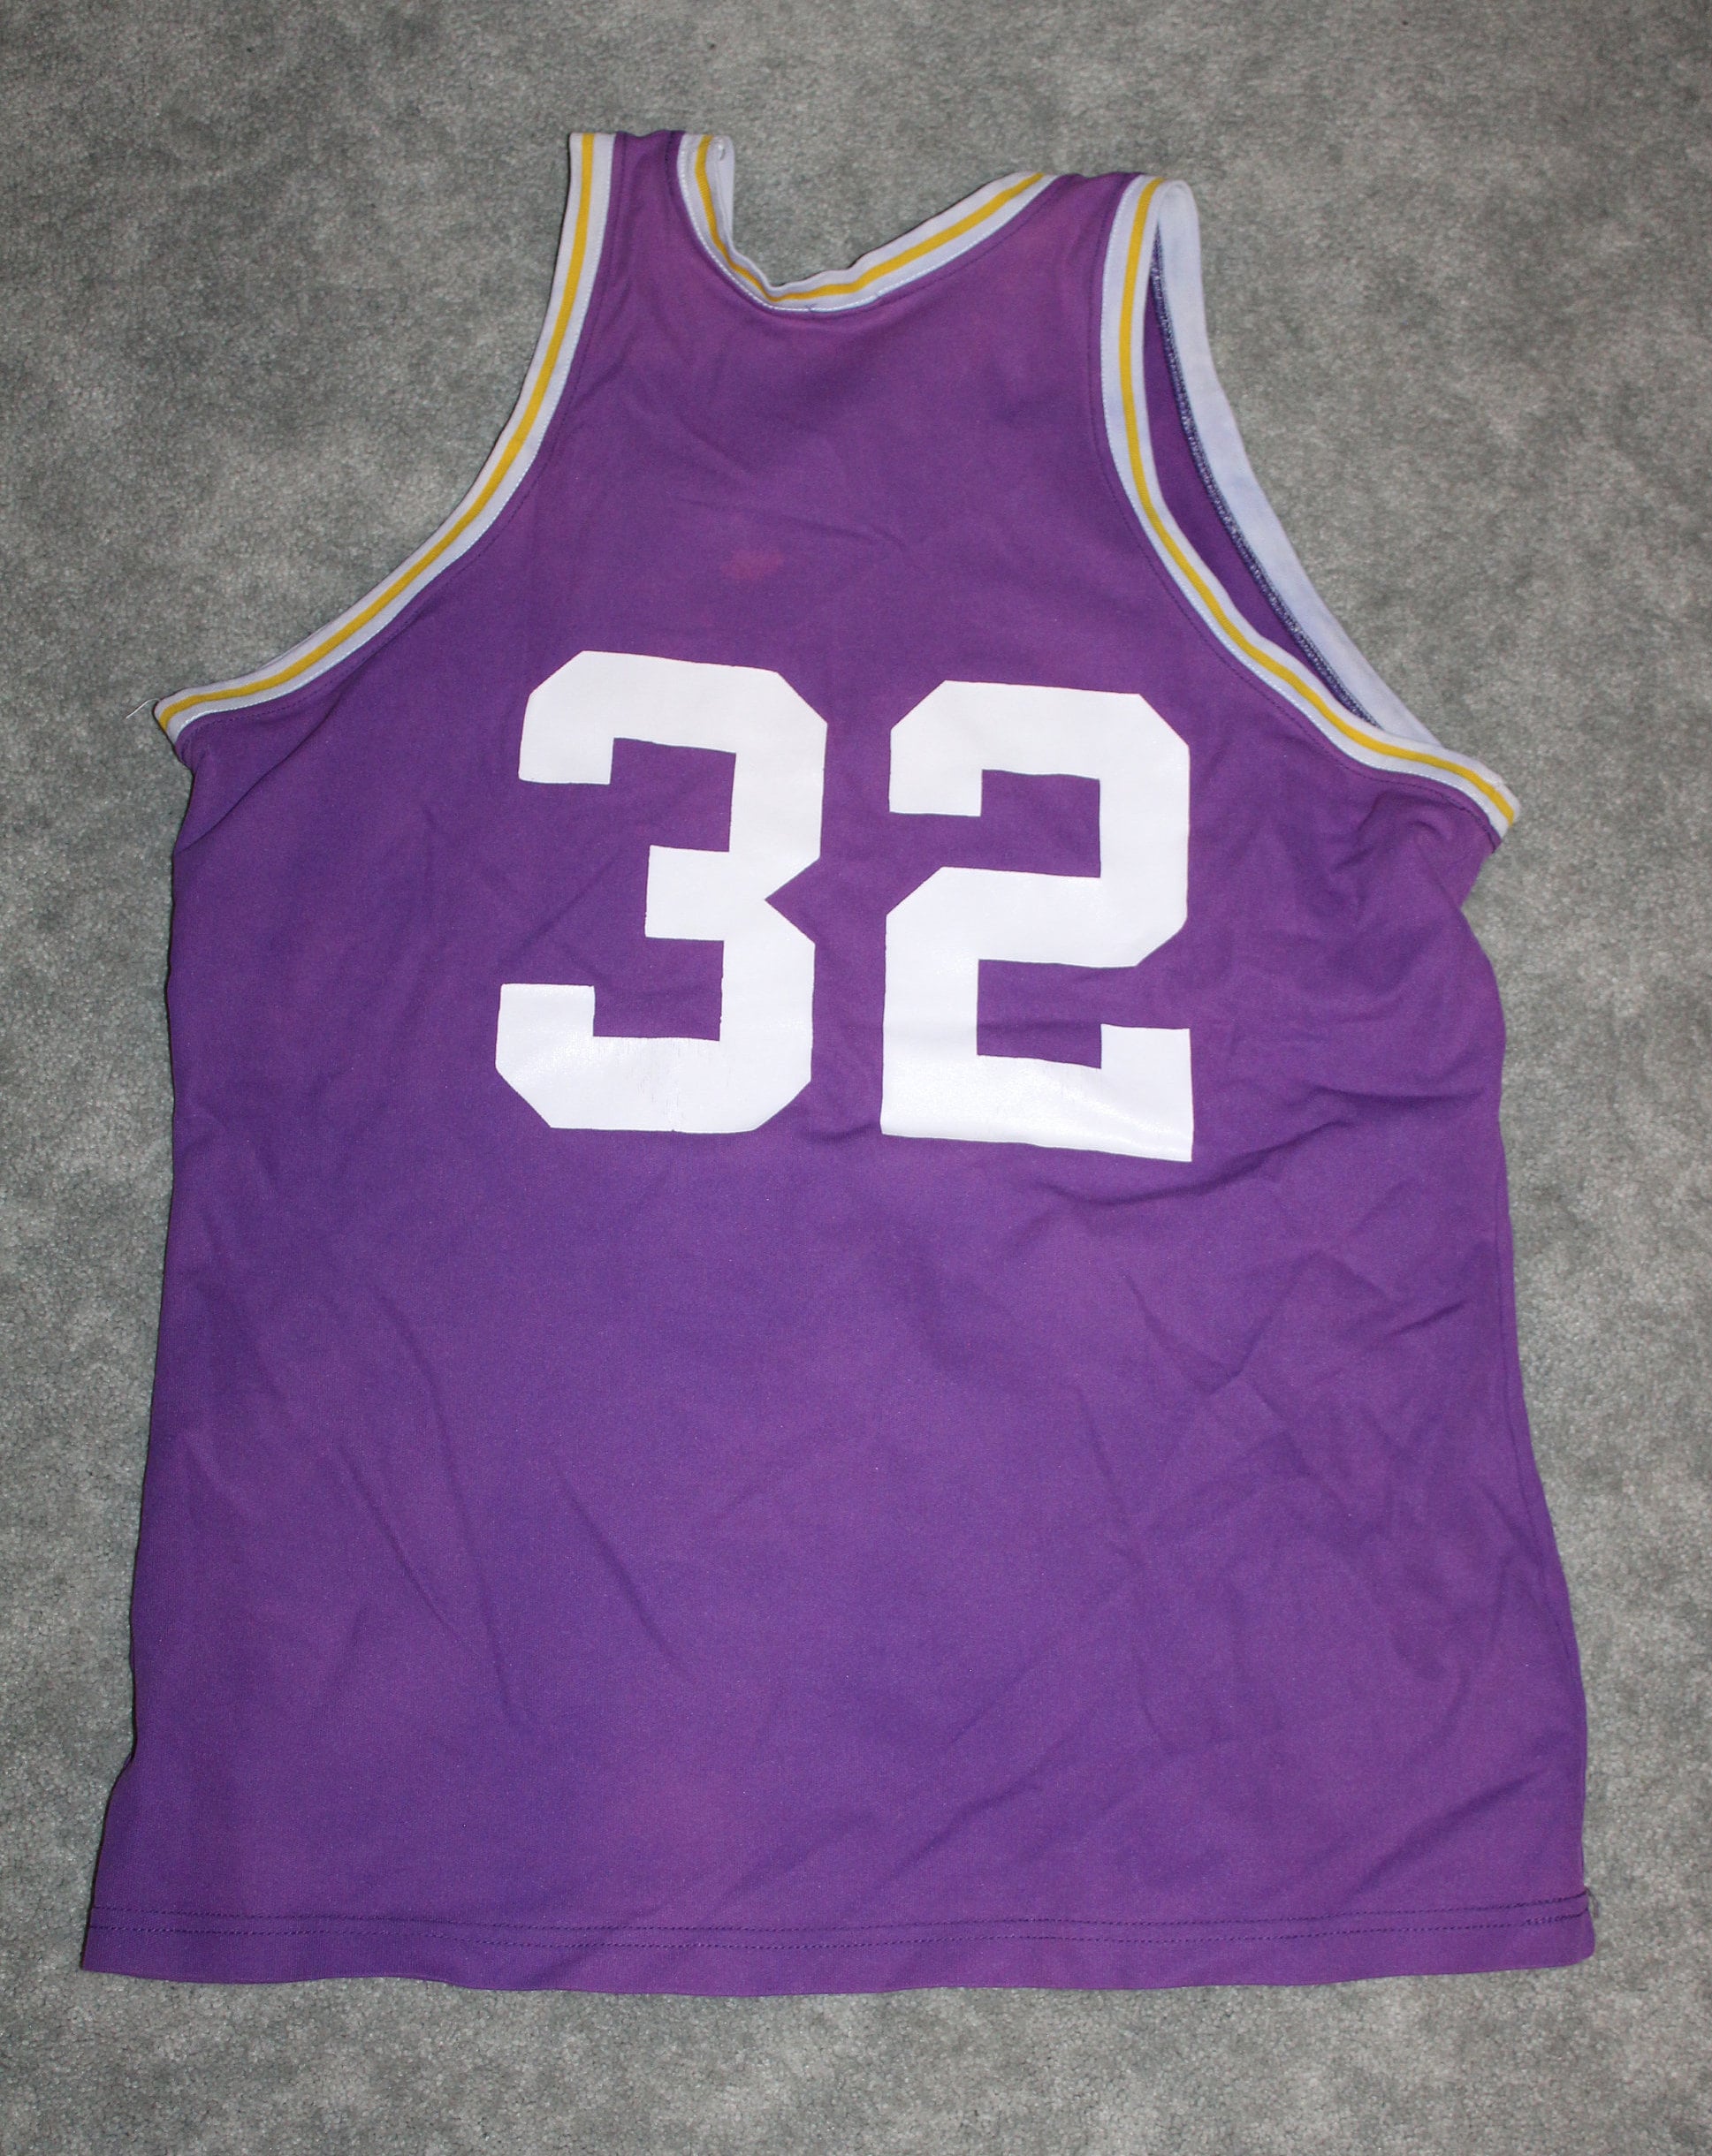 Old Lakers Jerseys & Shitrs for Sale - Vintage Sports Fashion